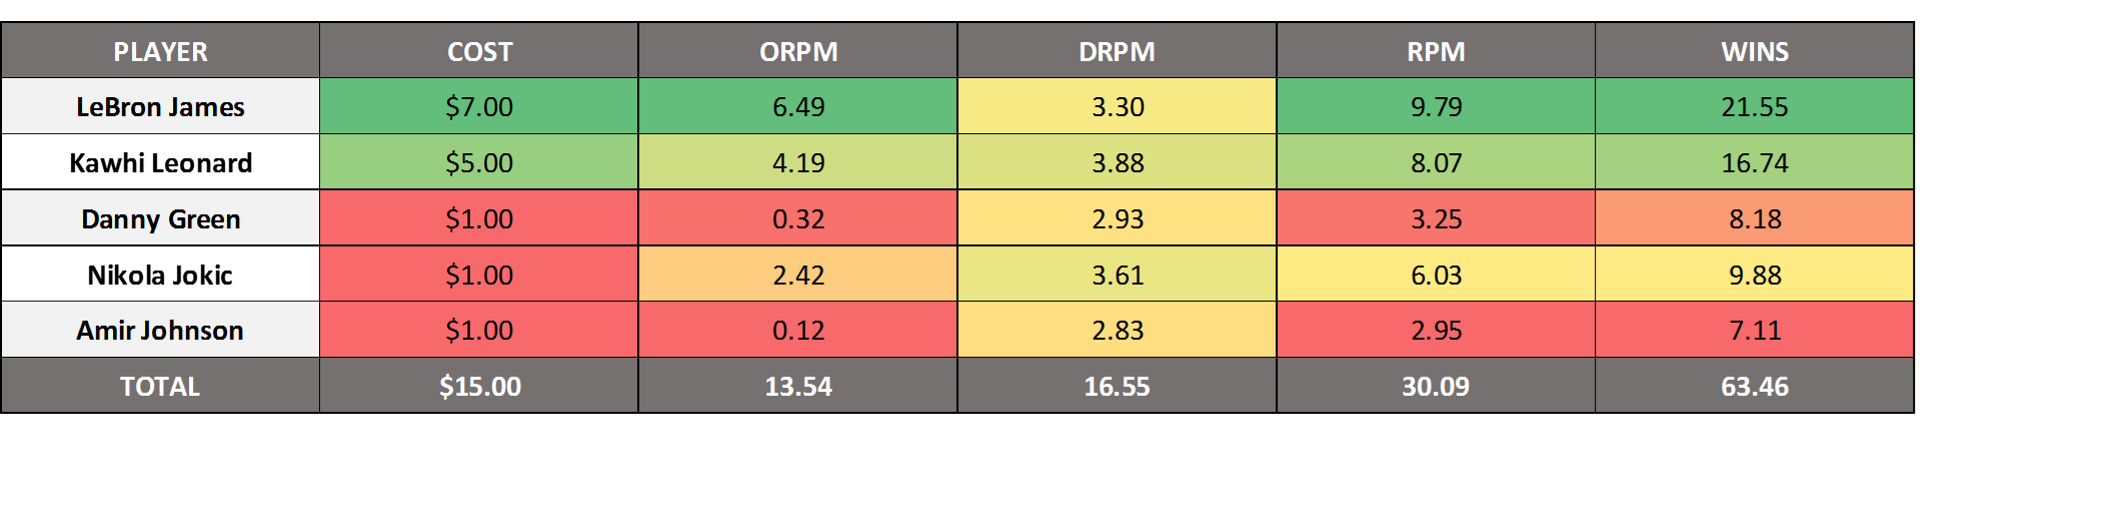 Maximize DRPM, Limit PG and C position to <=1, Don't Allow Negative ORPM Players